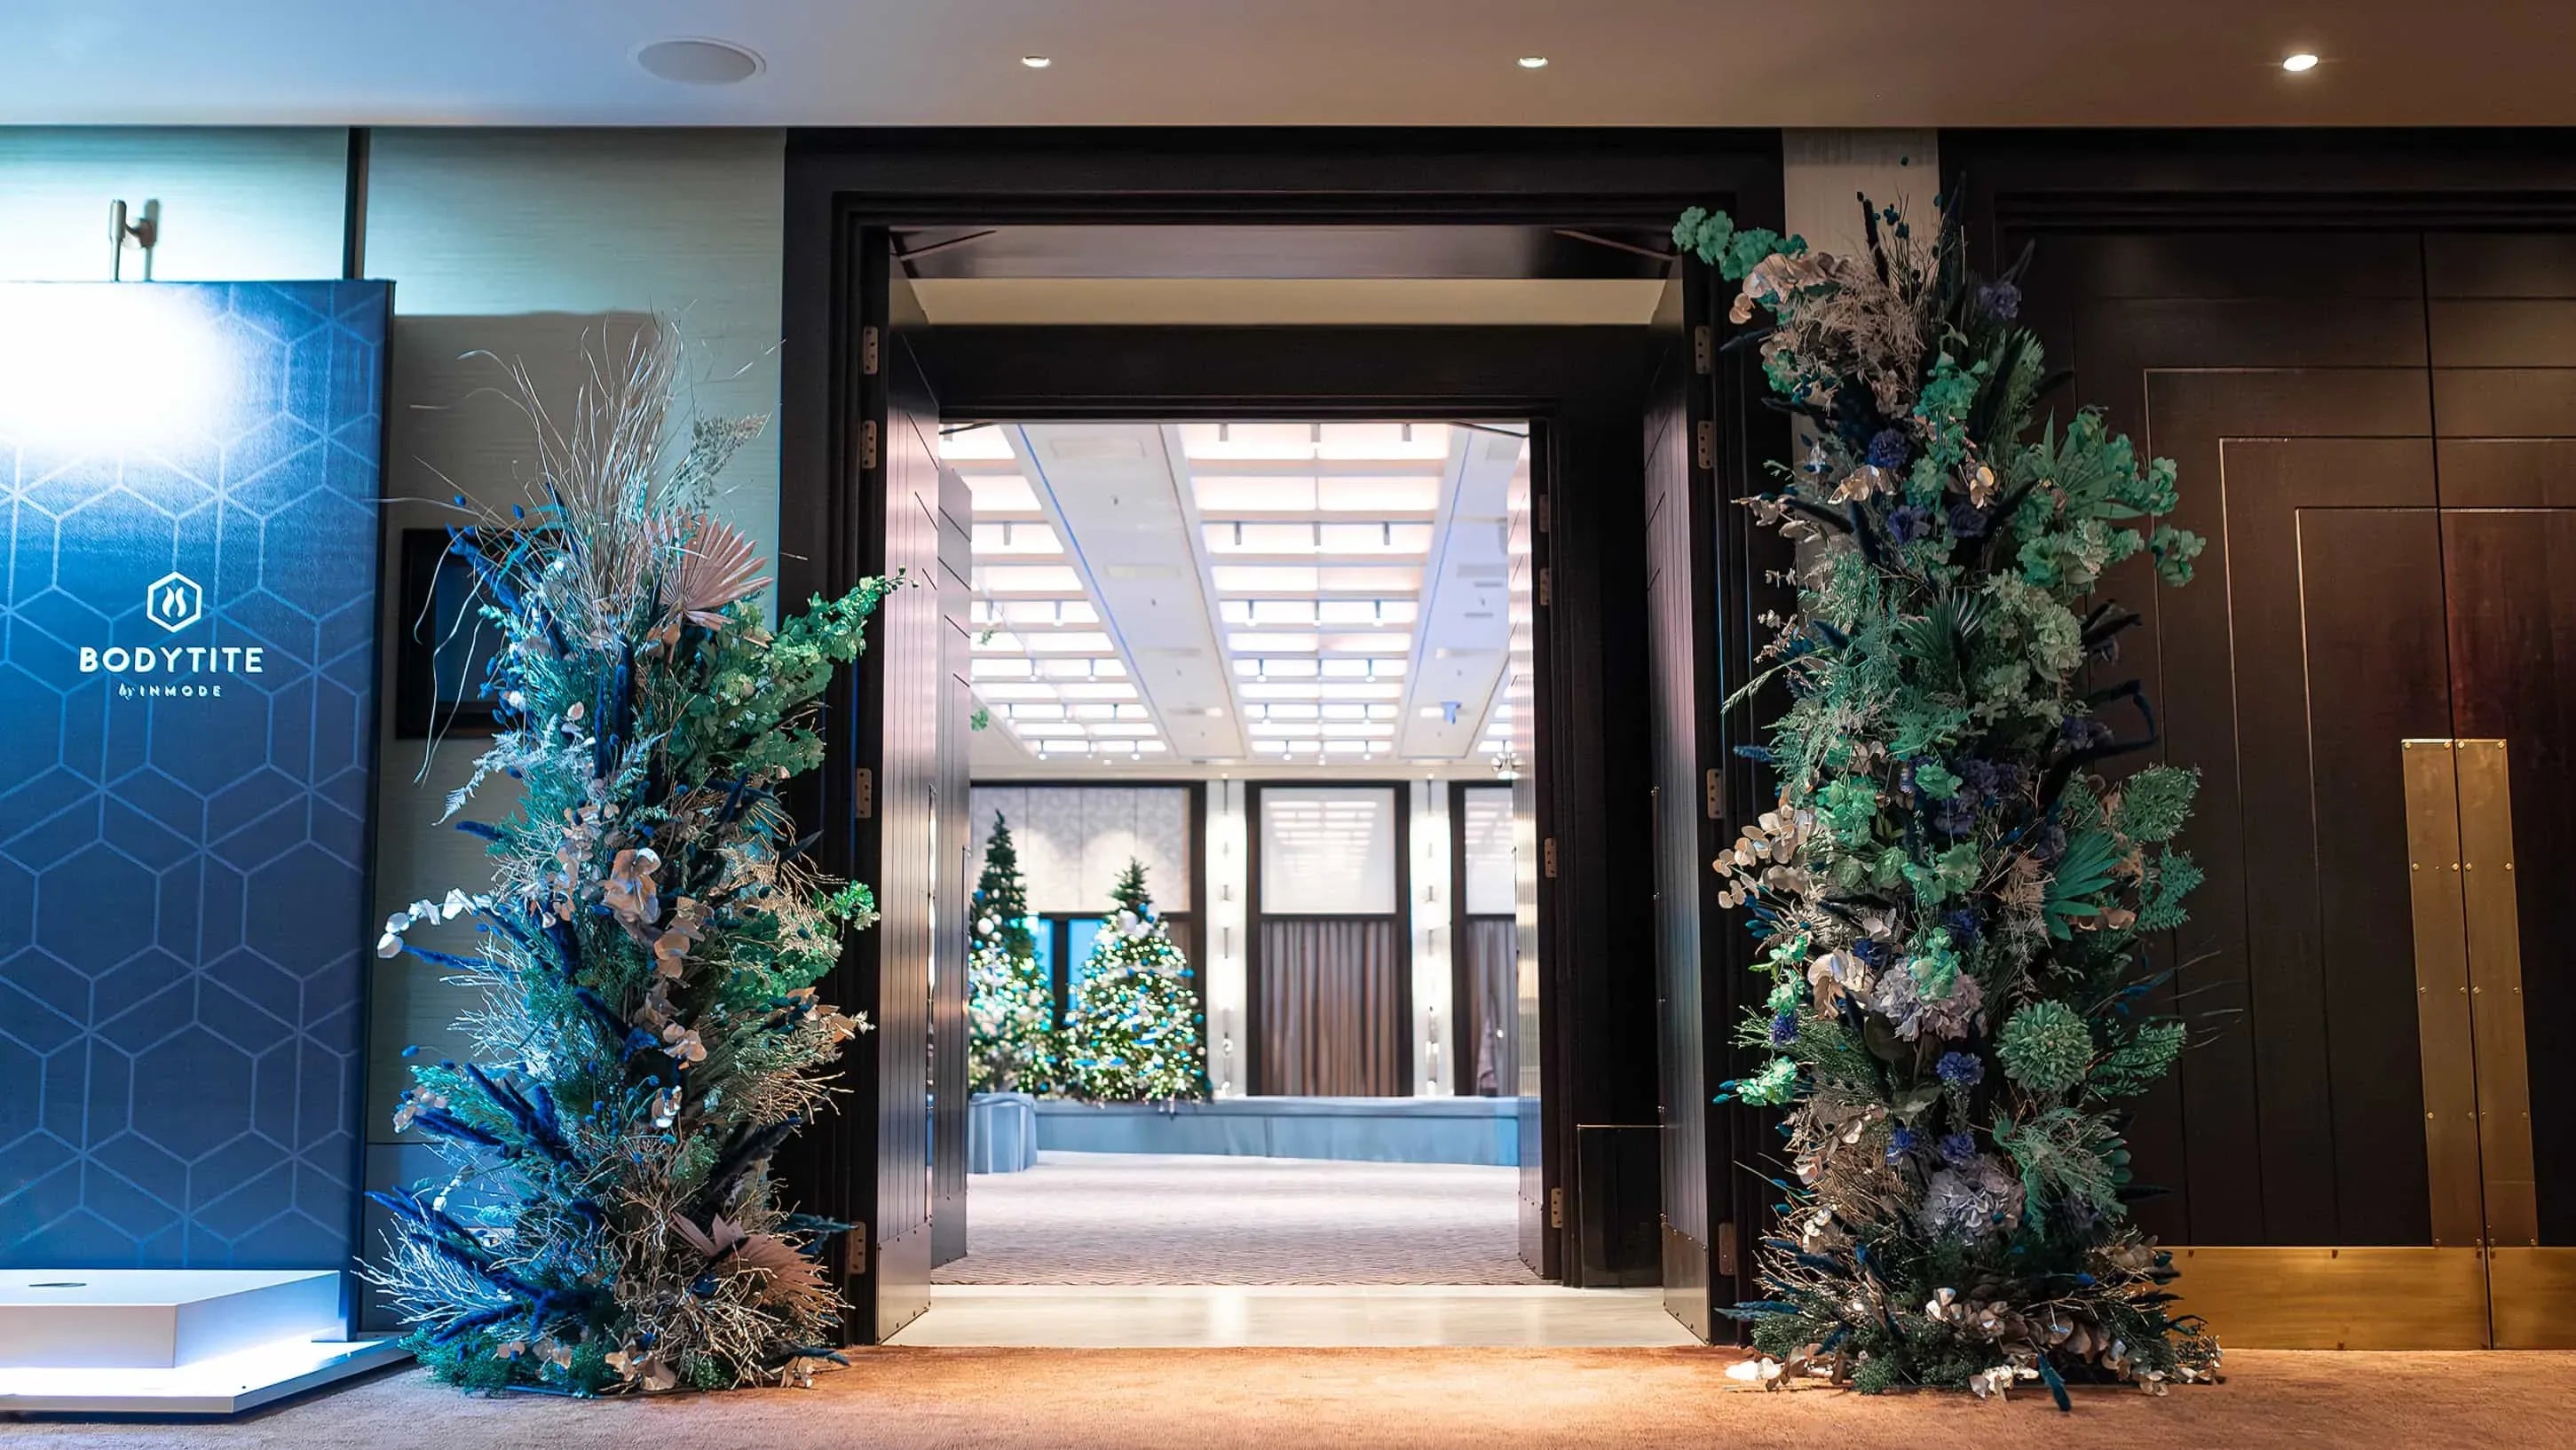 The INMODE welcoming foyer adorned with bespoke festive botanical displays in blue and silver next to a 'BODYTITE by InMode' promotional banner, with a glimpse of a lit Christmas tree through the doorway.